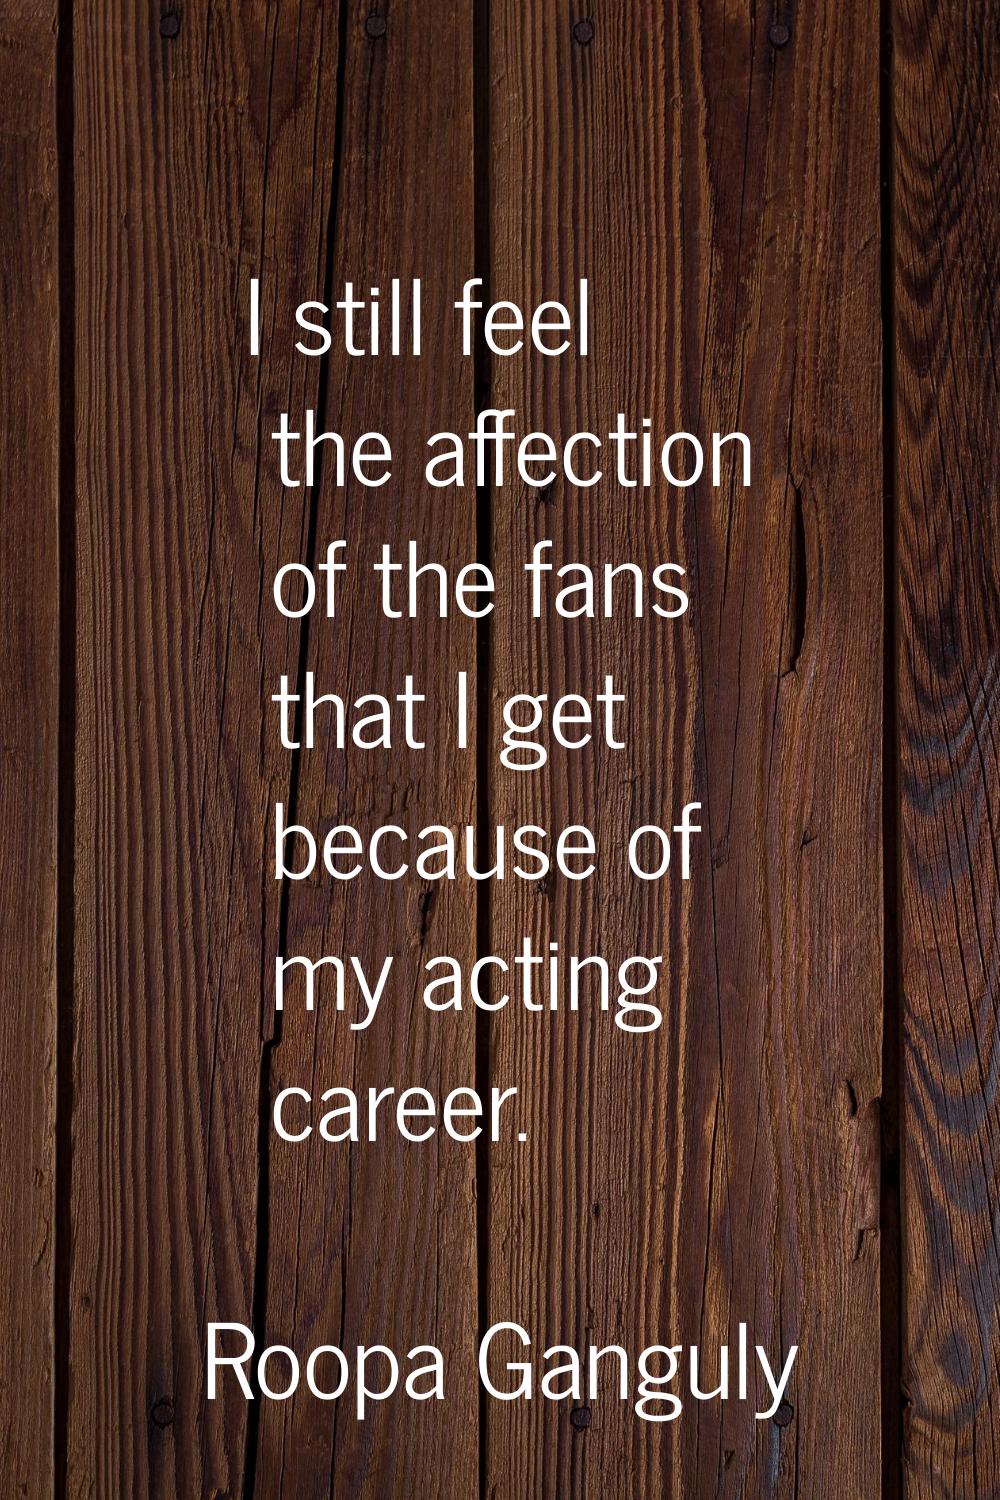 I still feel the affection of the fans that I get because of my acting career.